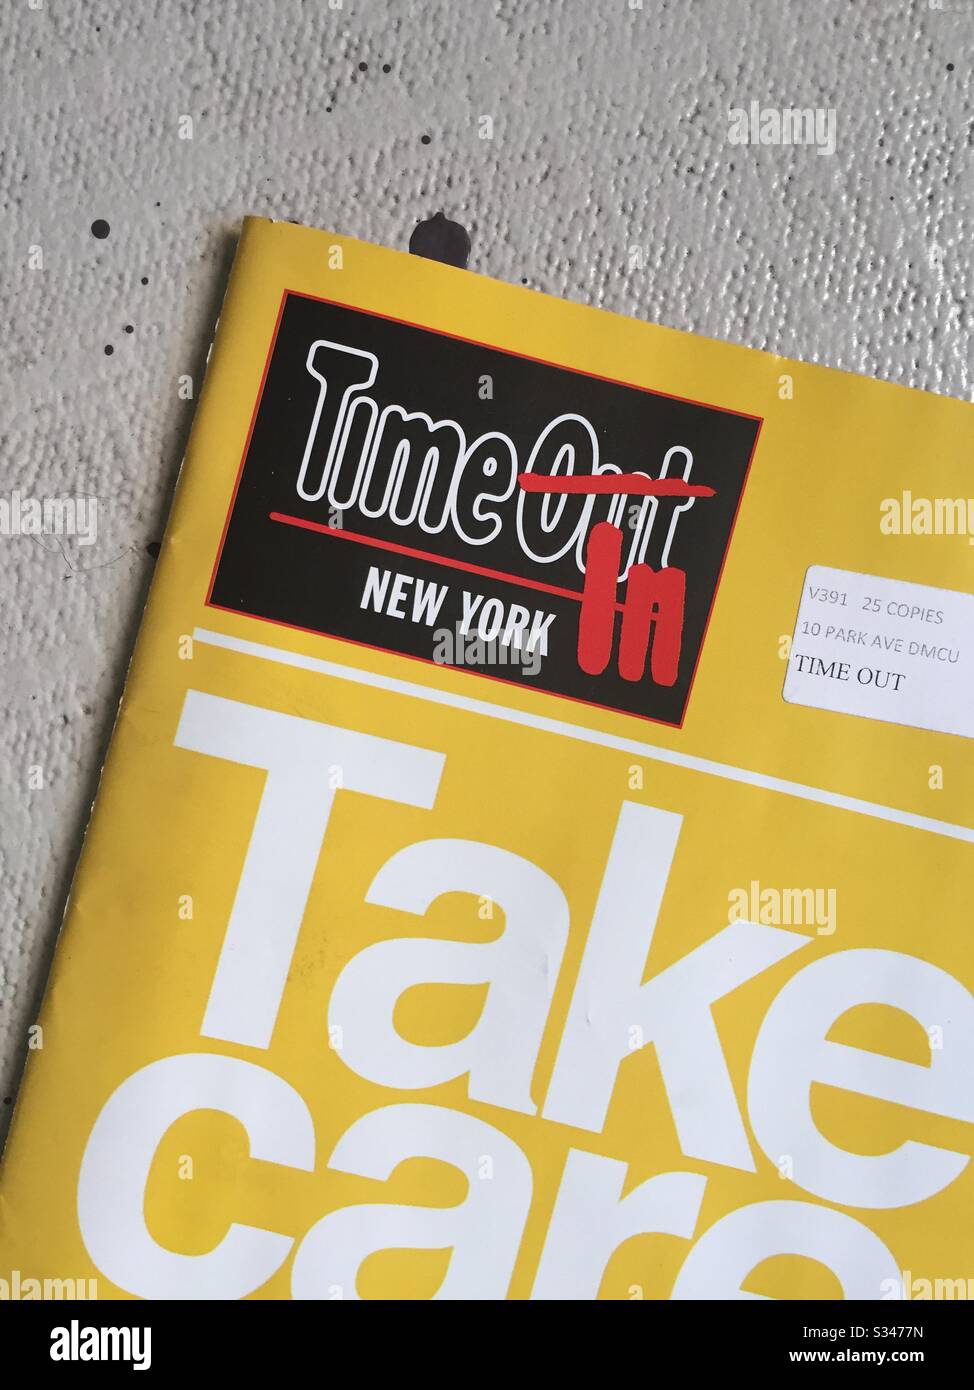 Cover of the weekly time out events magazine renamed time in because of the self isolation caused by the coronavirus in New York City, USA Stock Photo